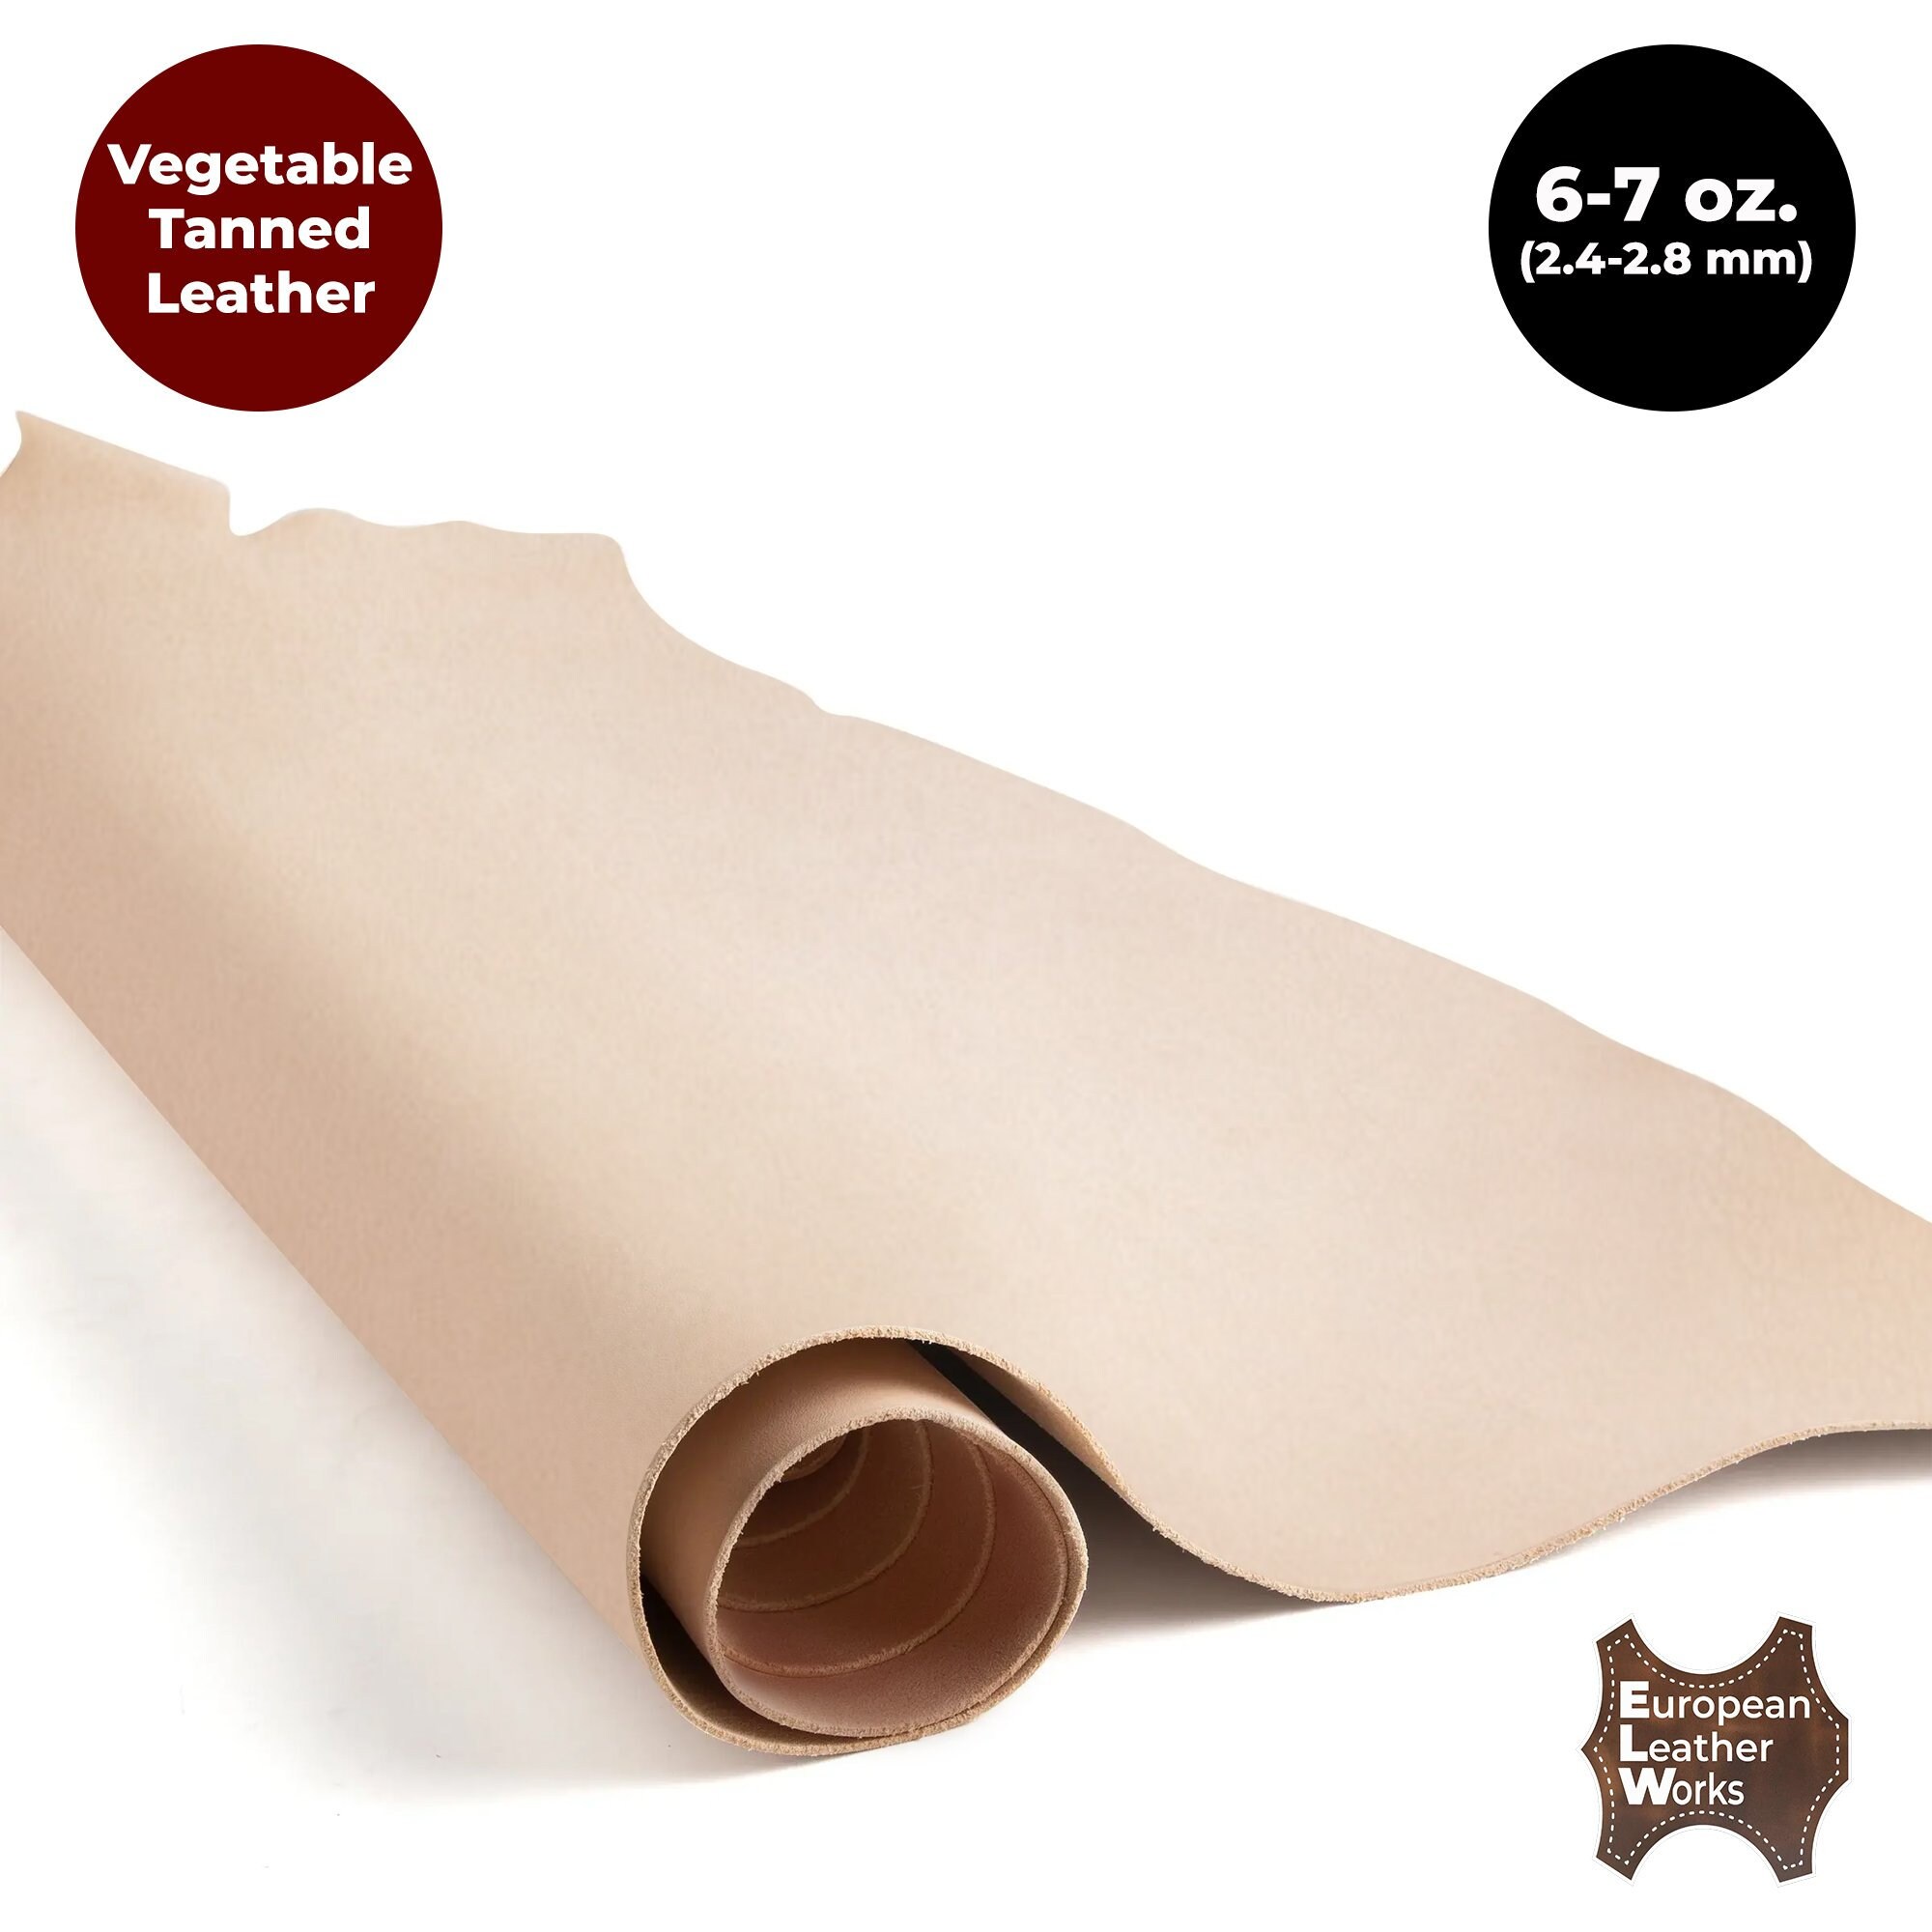  ELW 2-10 oz (.8-4mm) Thickness, 1 LB Vegetable Tanned